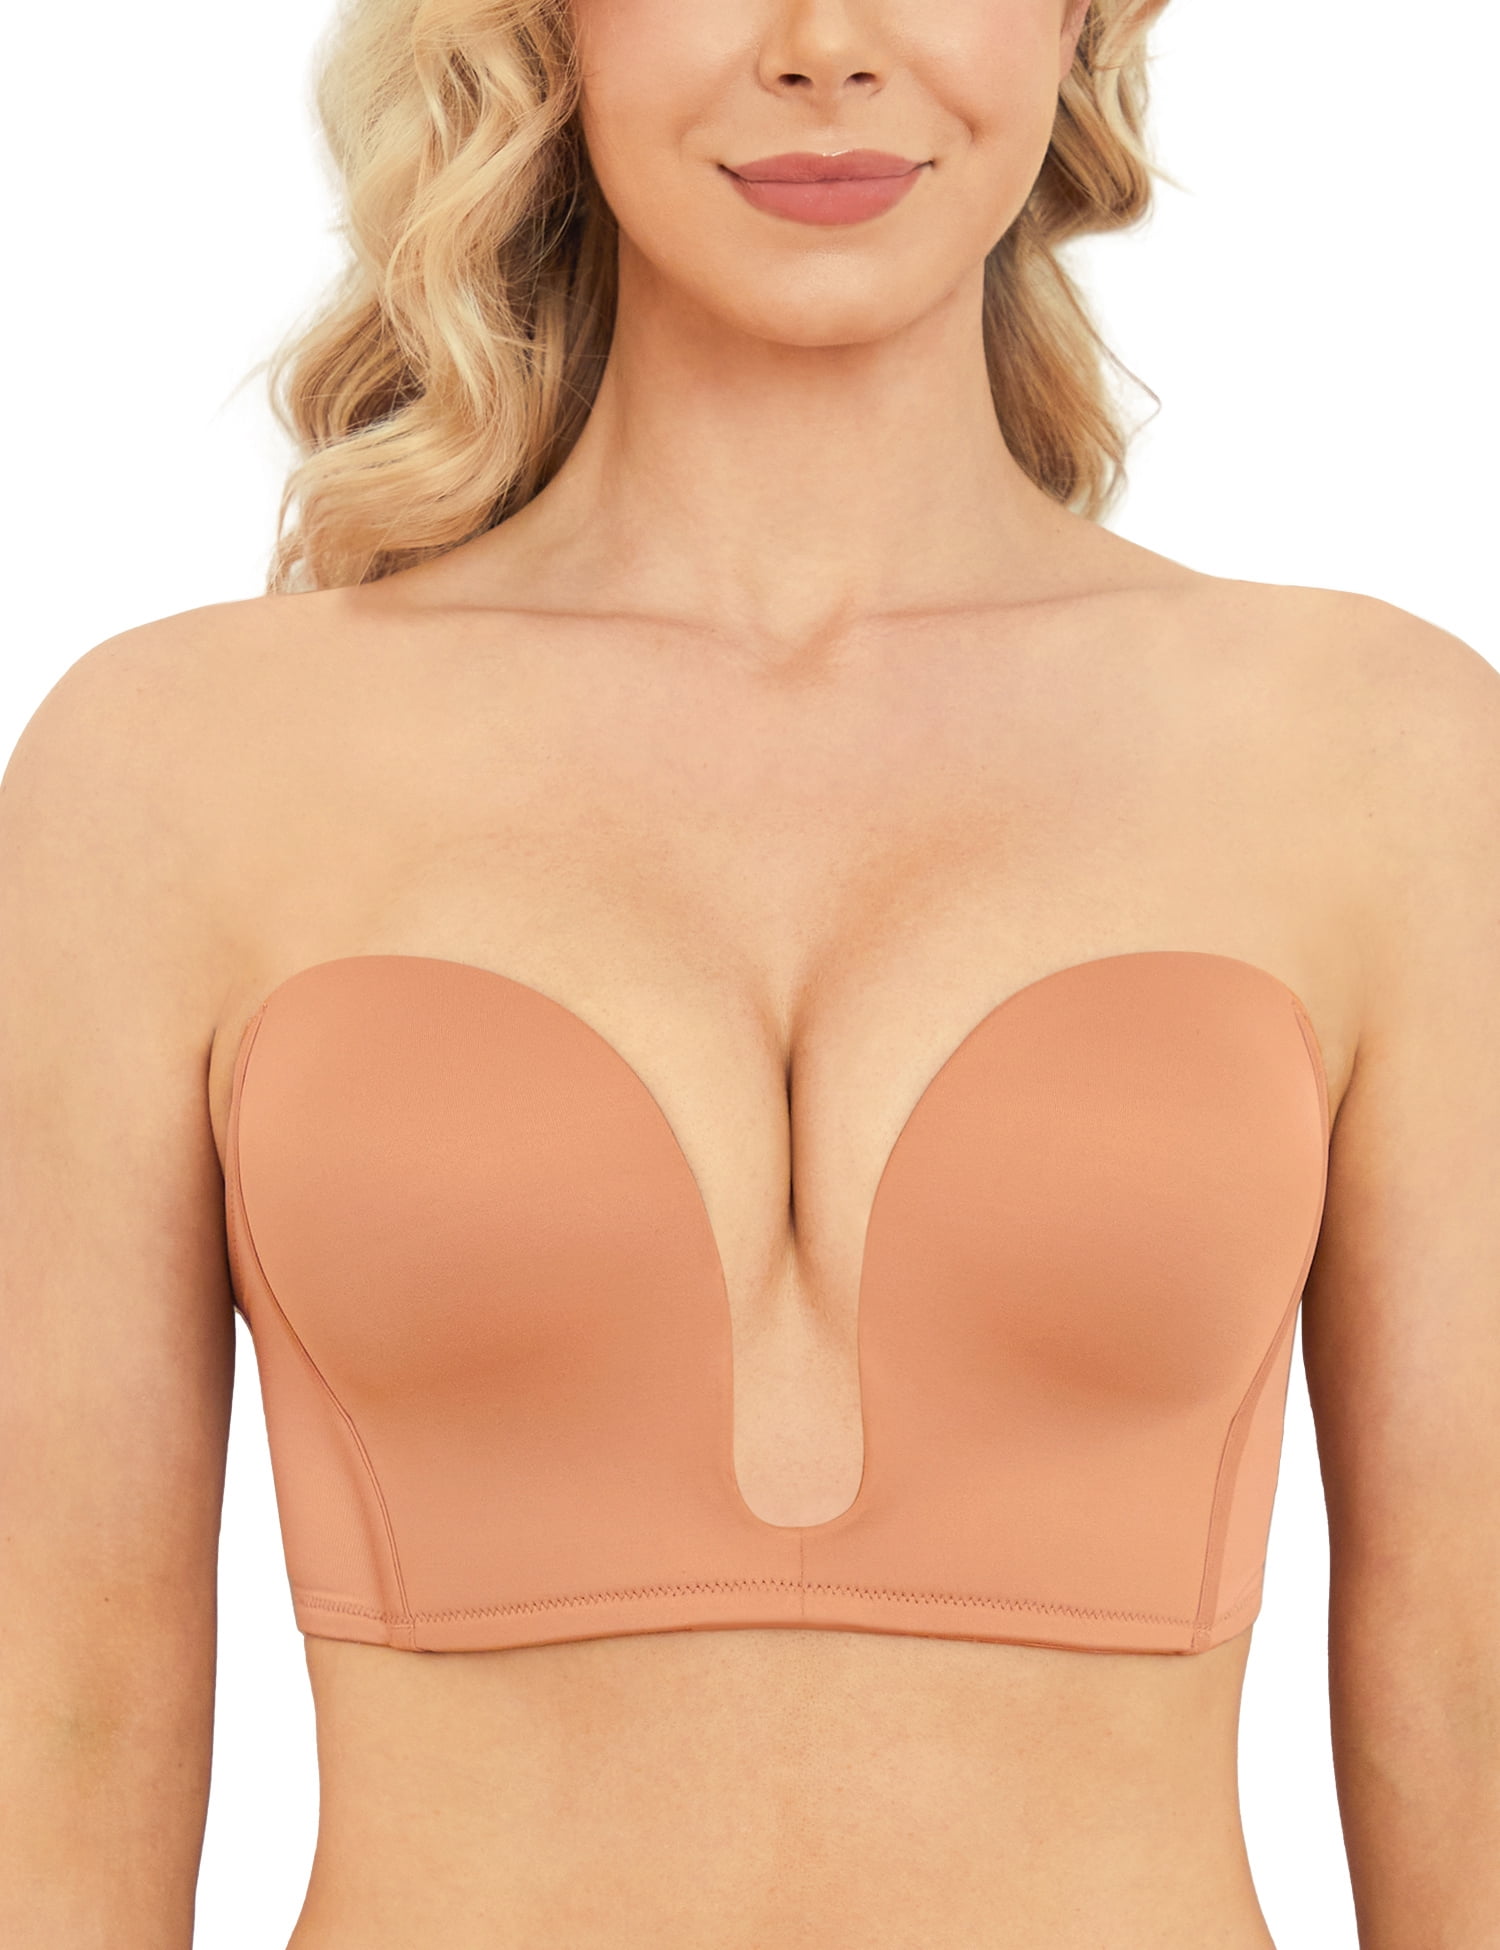 Simply U Bra - Deep Plunge Bra for Low Cut Tops and Dresses